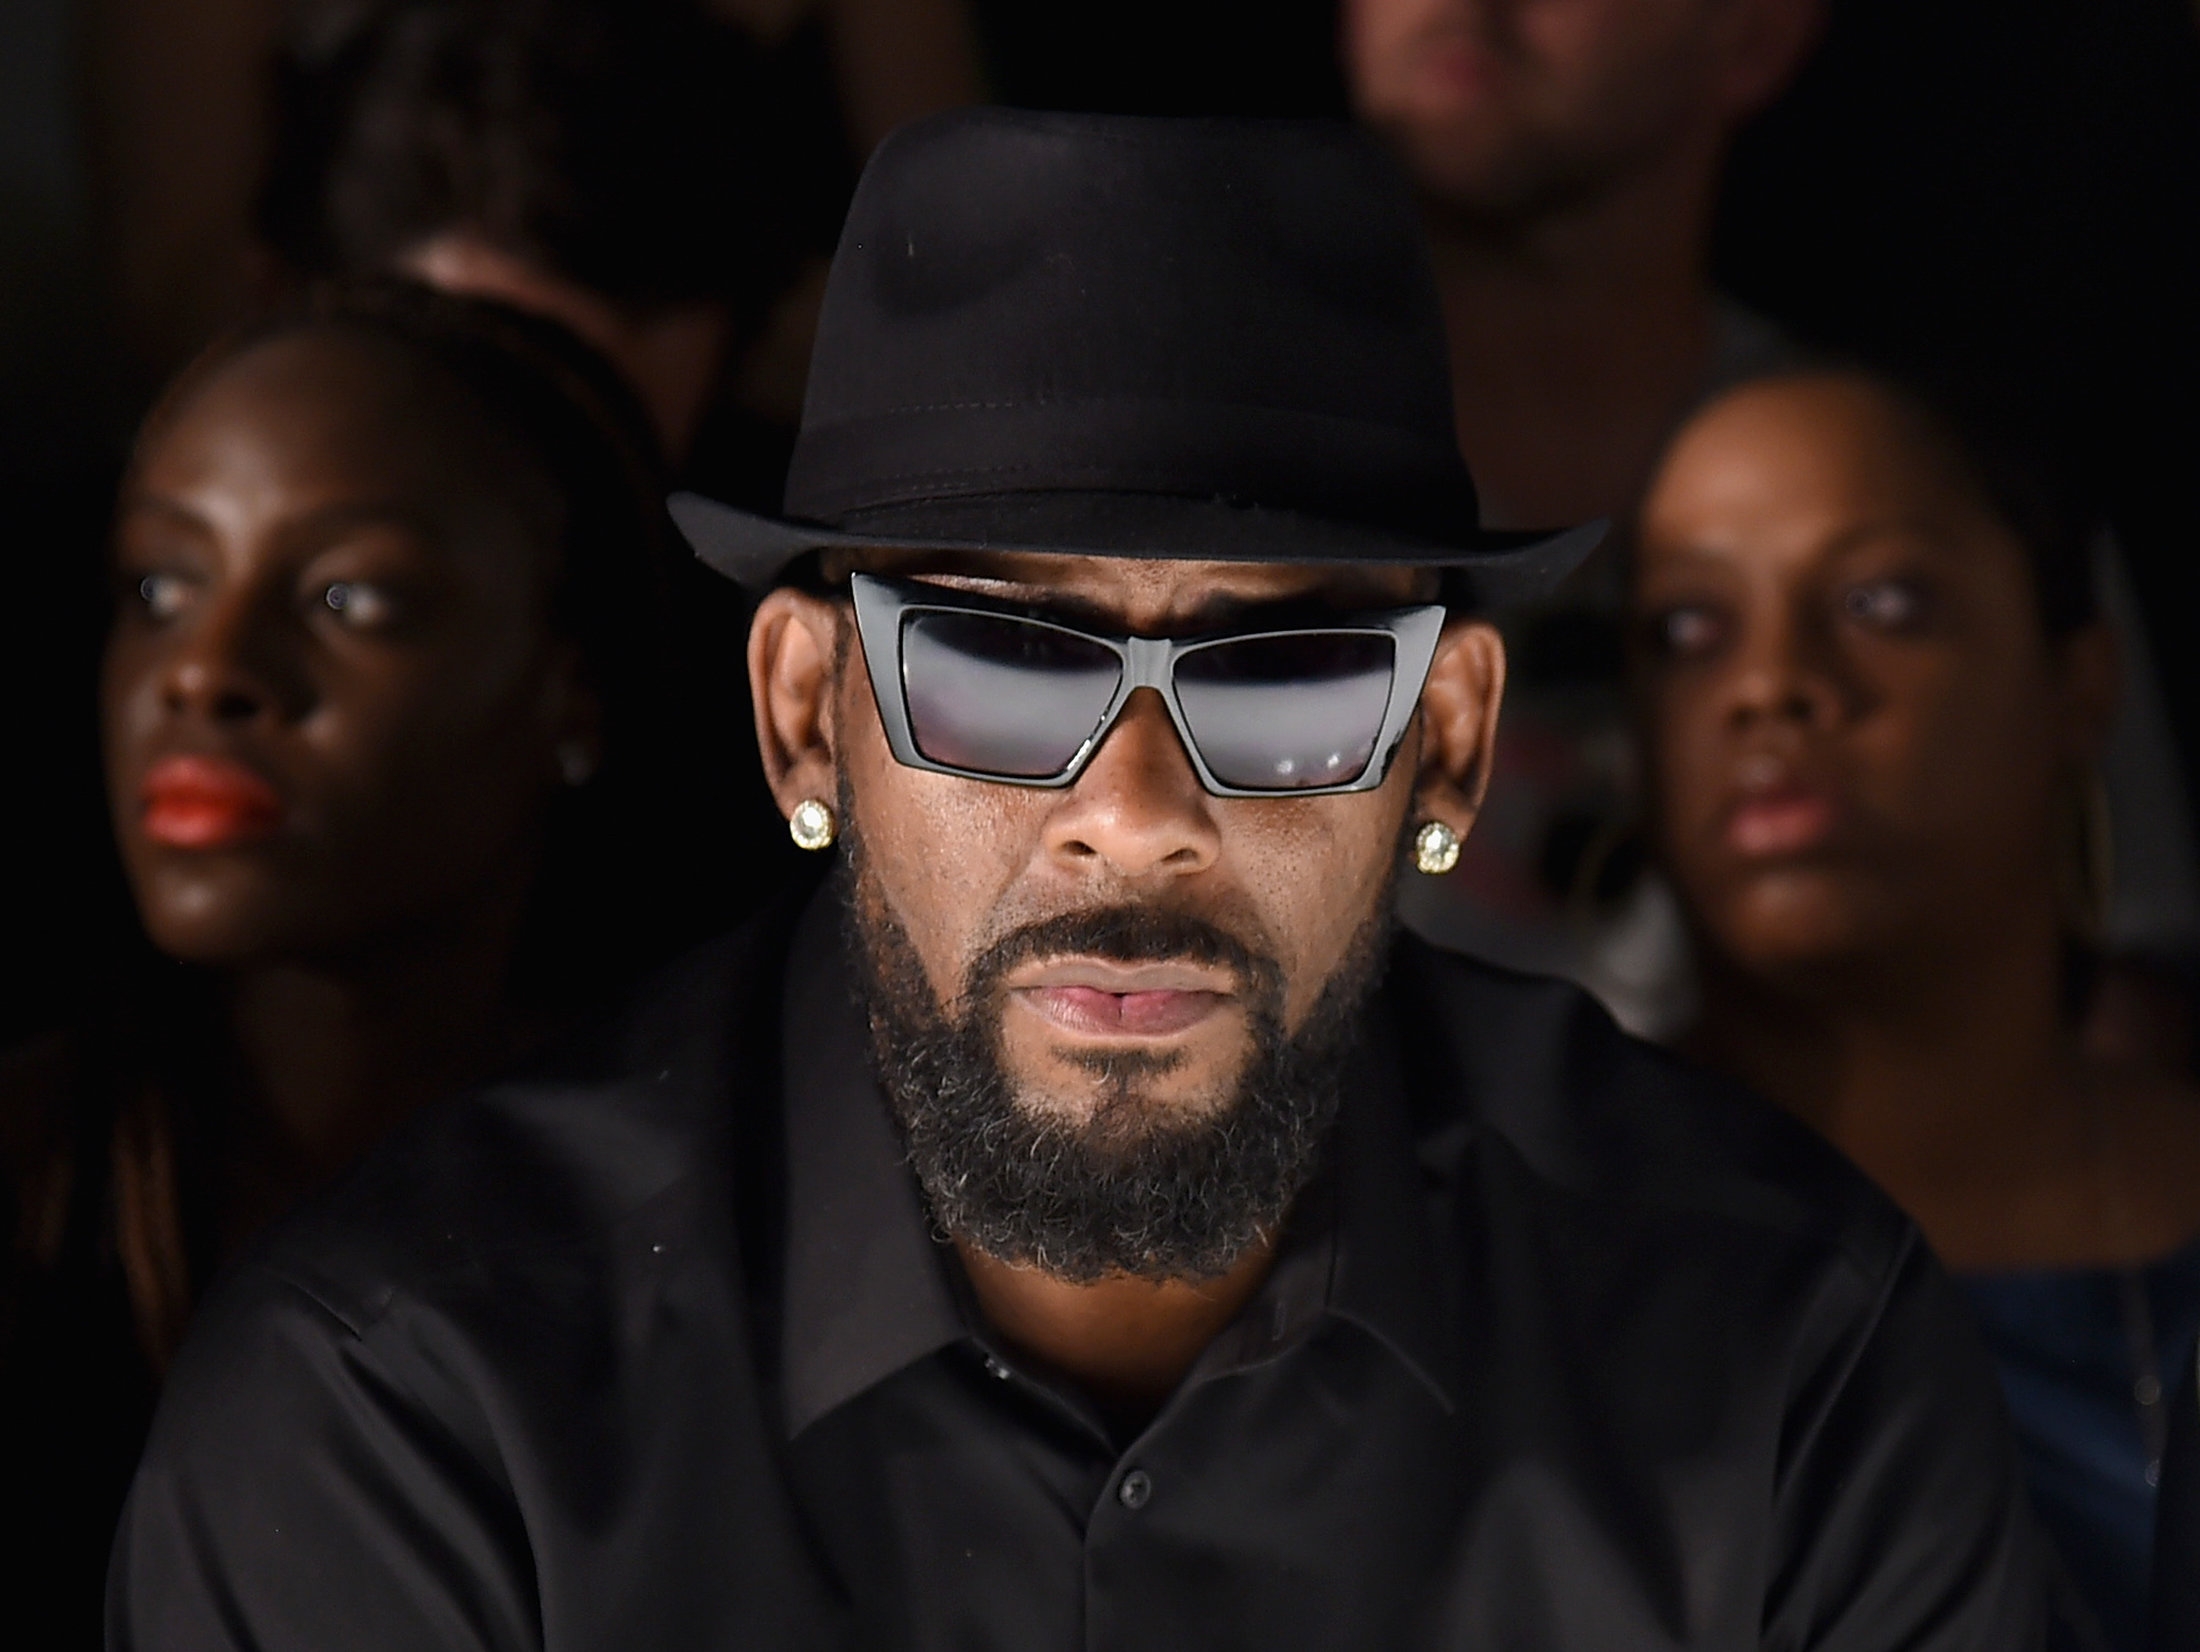 The allegations against R. Kelly: An abridged history